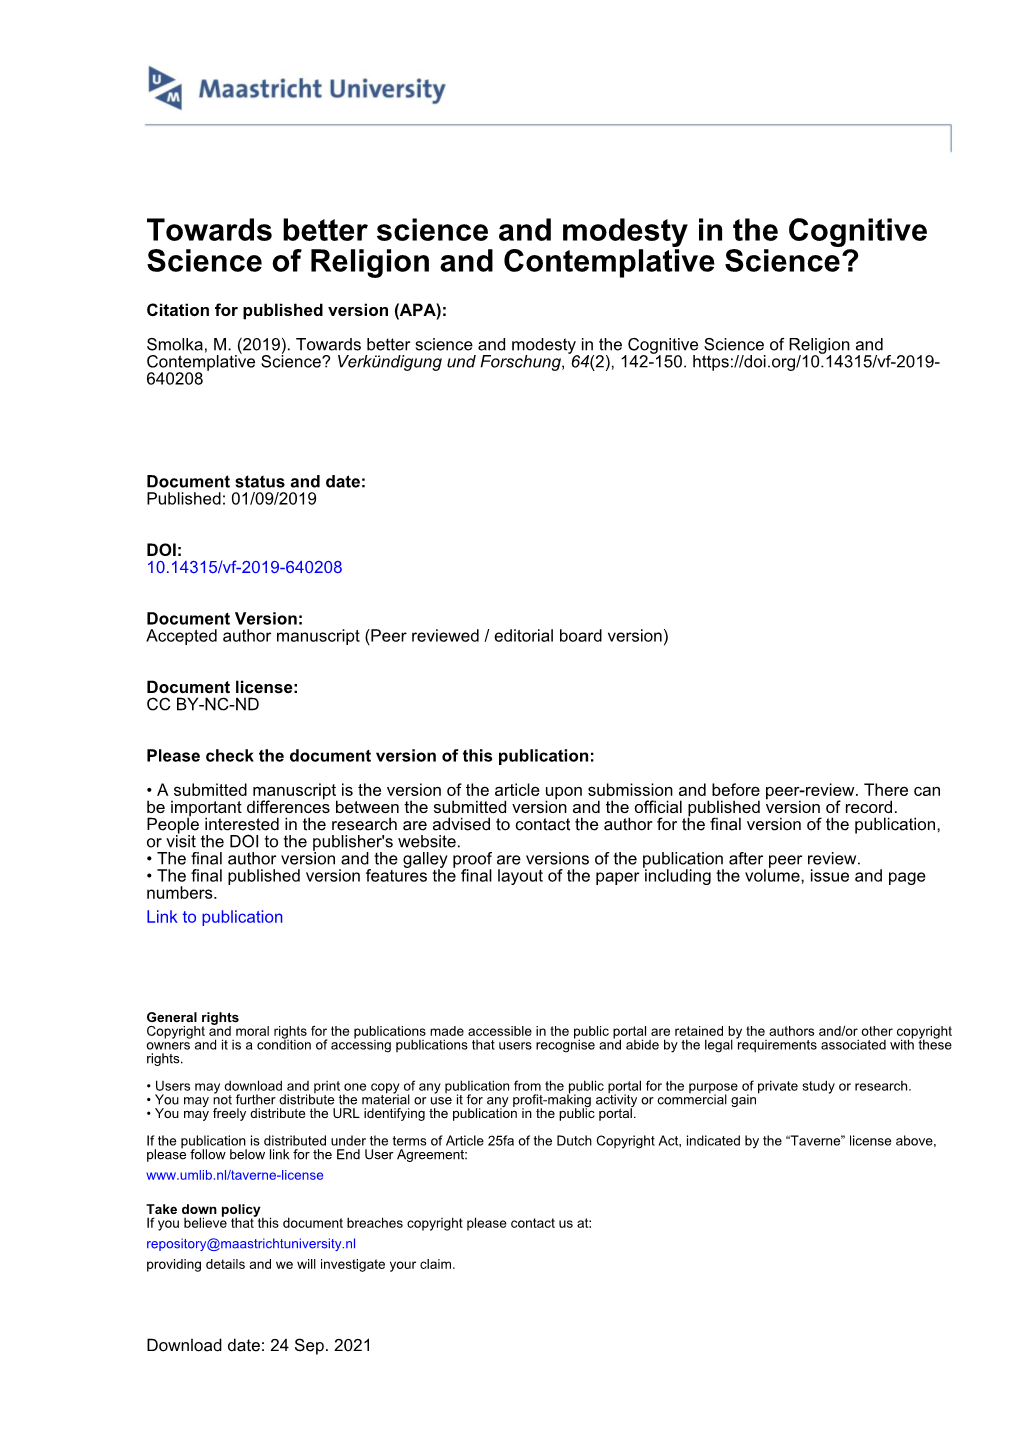 Towards Better Science and Modesty in the Cognitive Science of Religion and Contemplative Science?